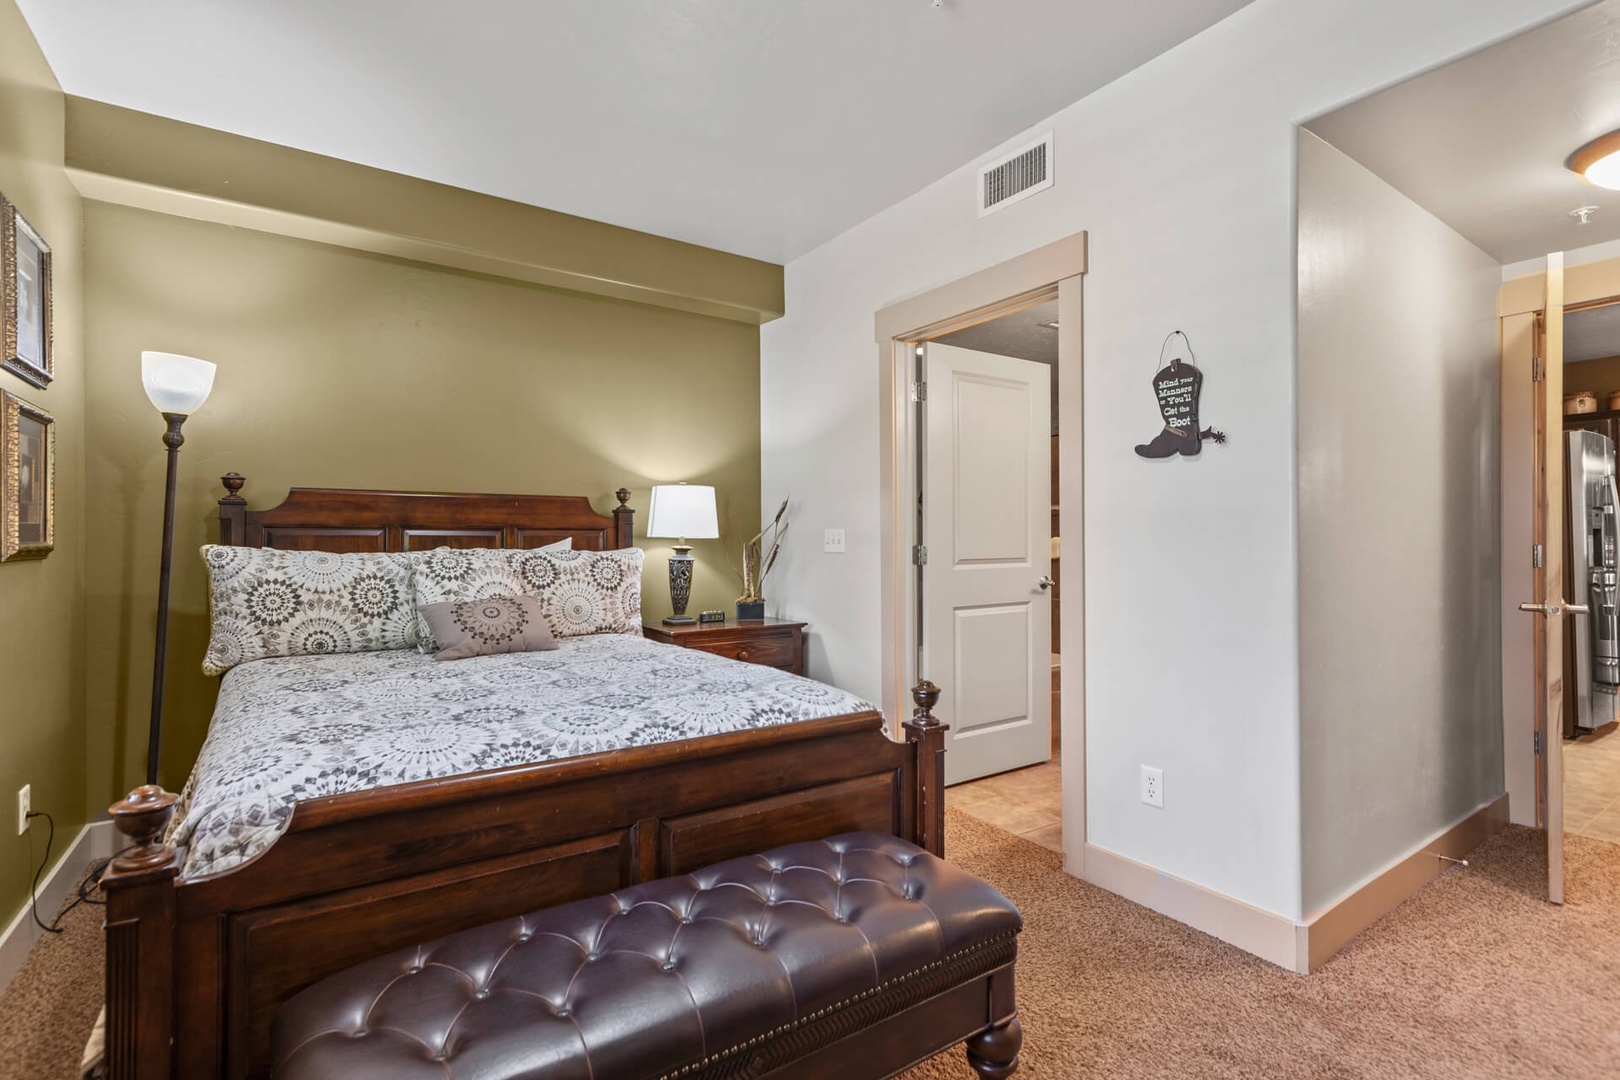 Bear Hollow Lodges 4201: The Master bedroom is a retreat that invites you to enjoy the comfortable bed and luxury bedding with an attached, beautifully appointed bathroom.